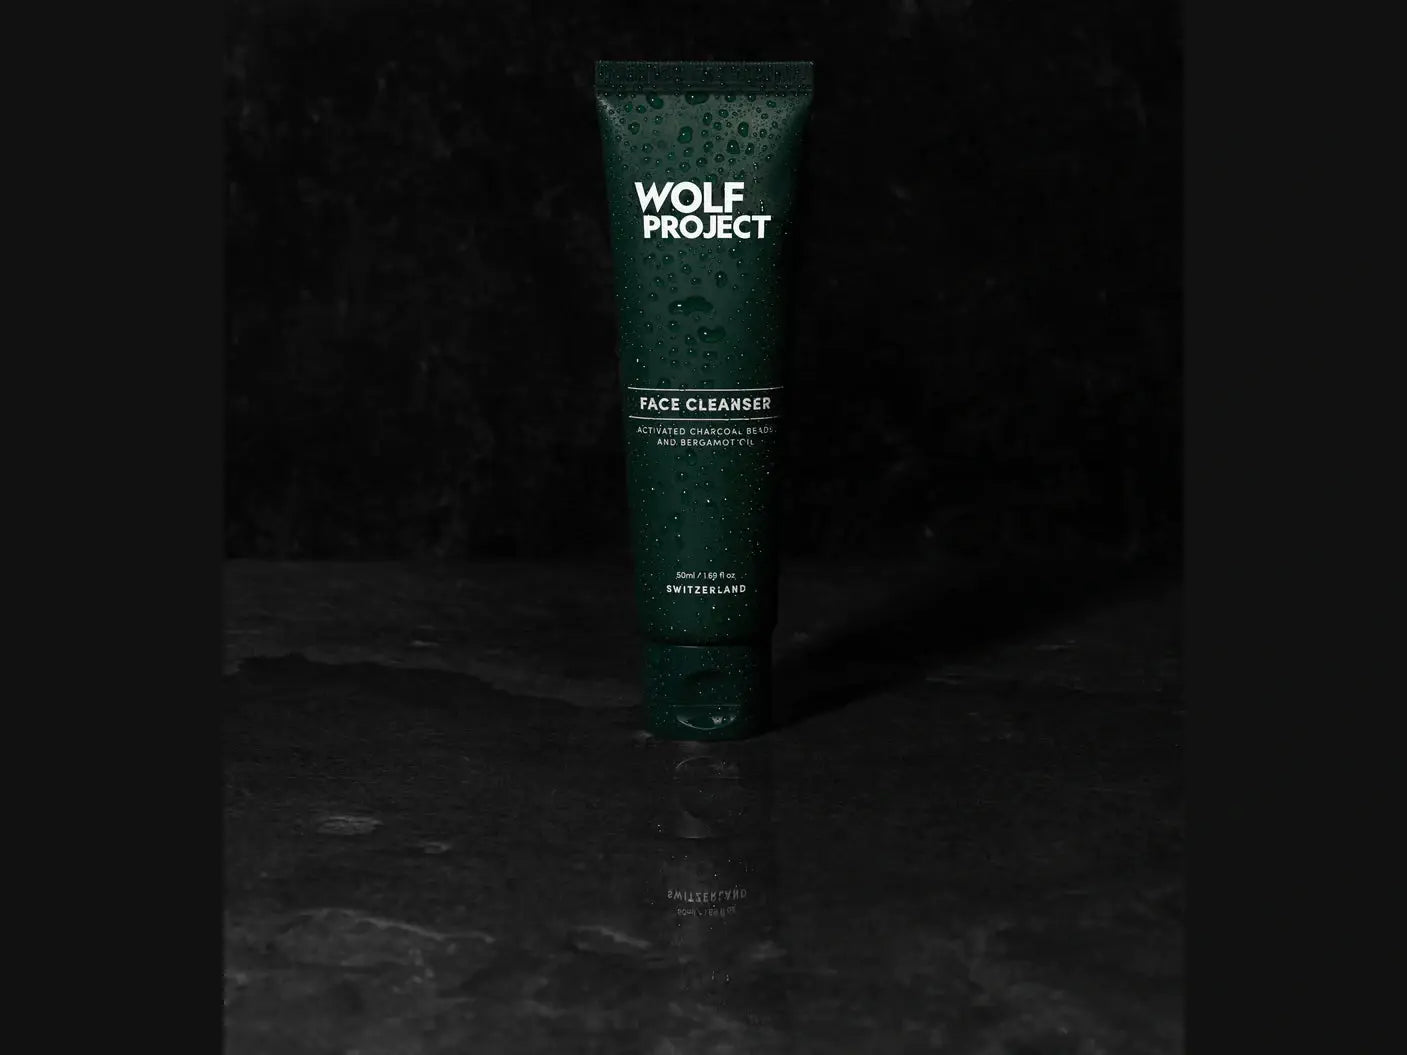 Load image into Gallery viewer, WOLF FACE CLEANSER, 50 ml
